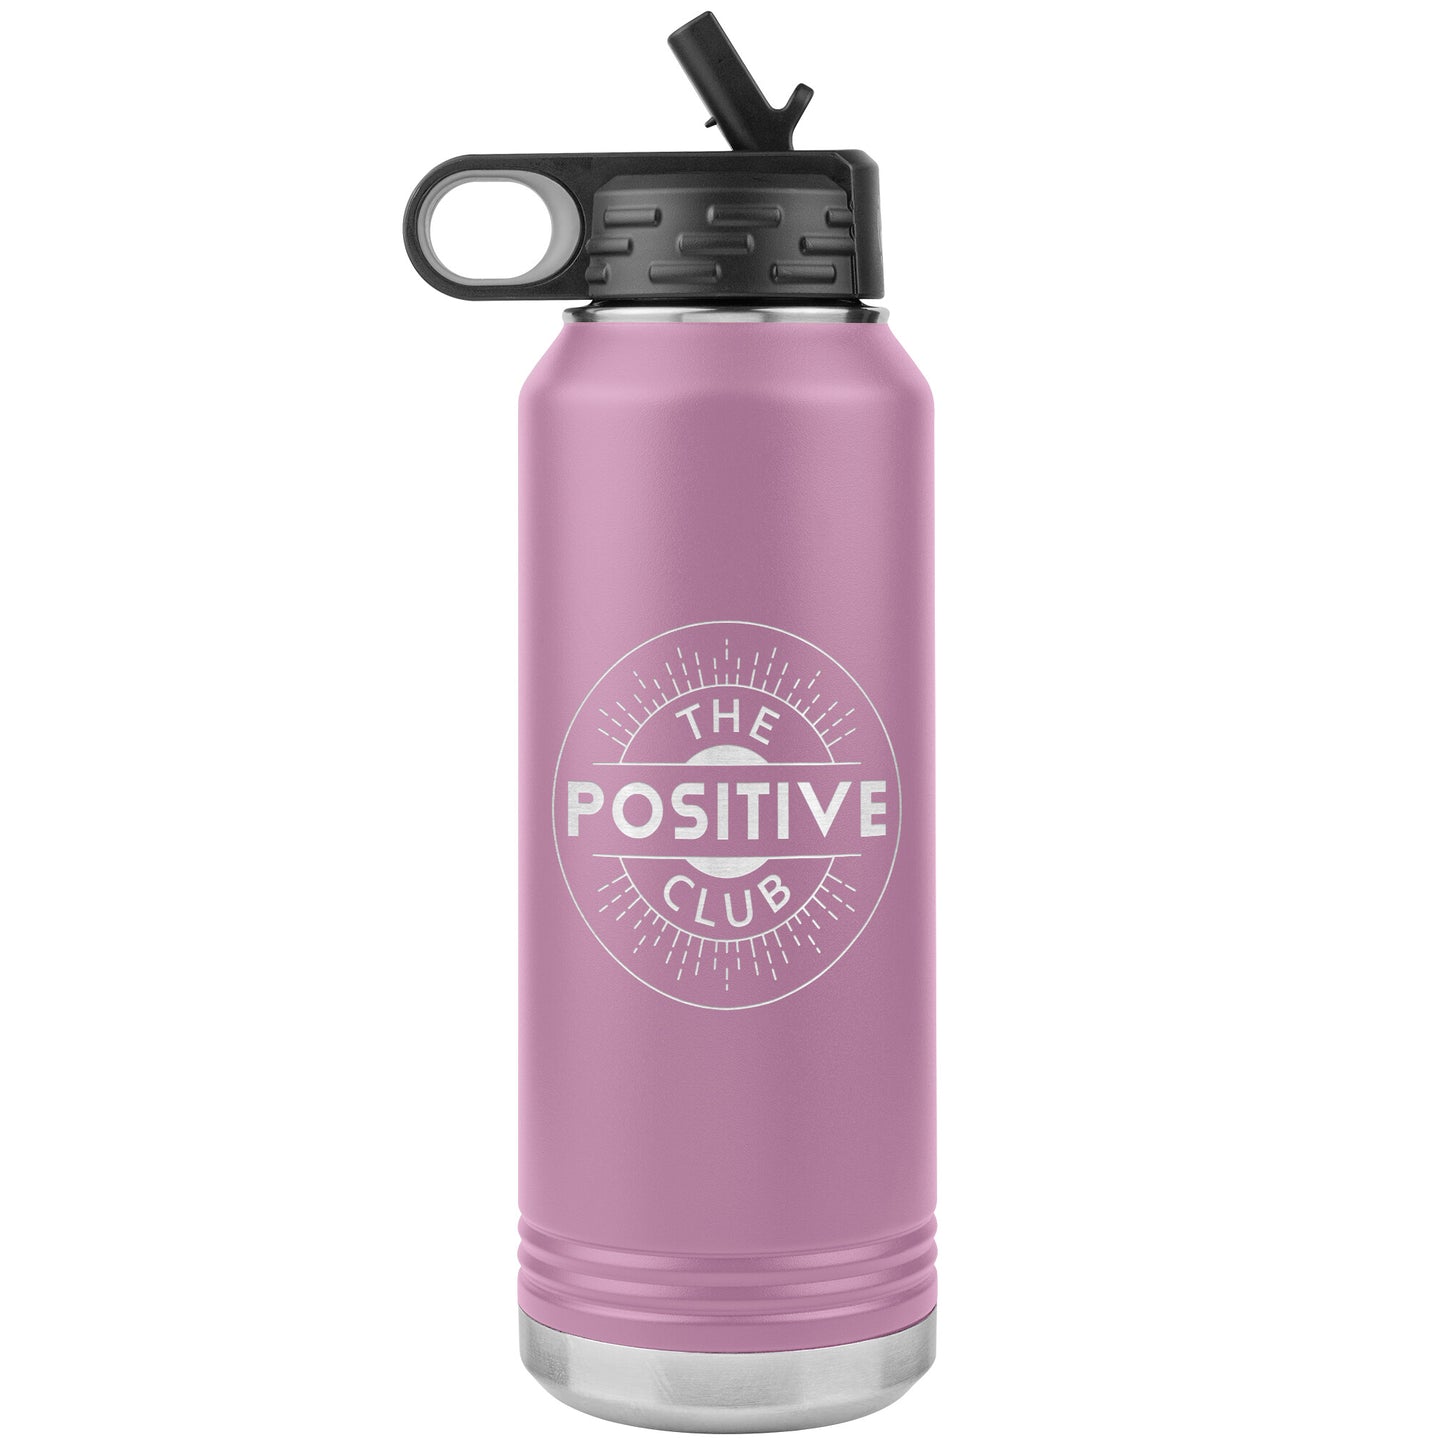 32oz Water Bottle Insulated The Positive Club ( Free Shipping )